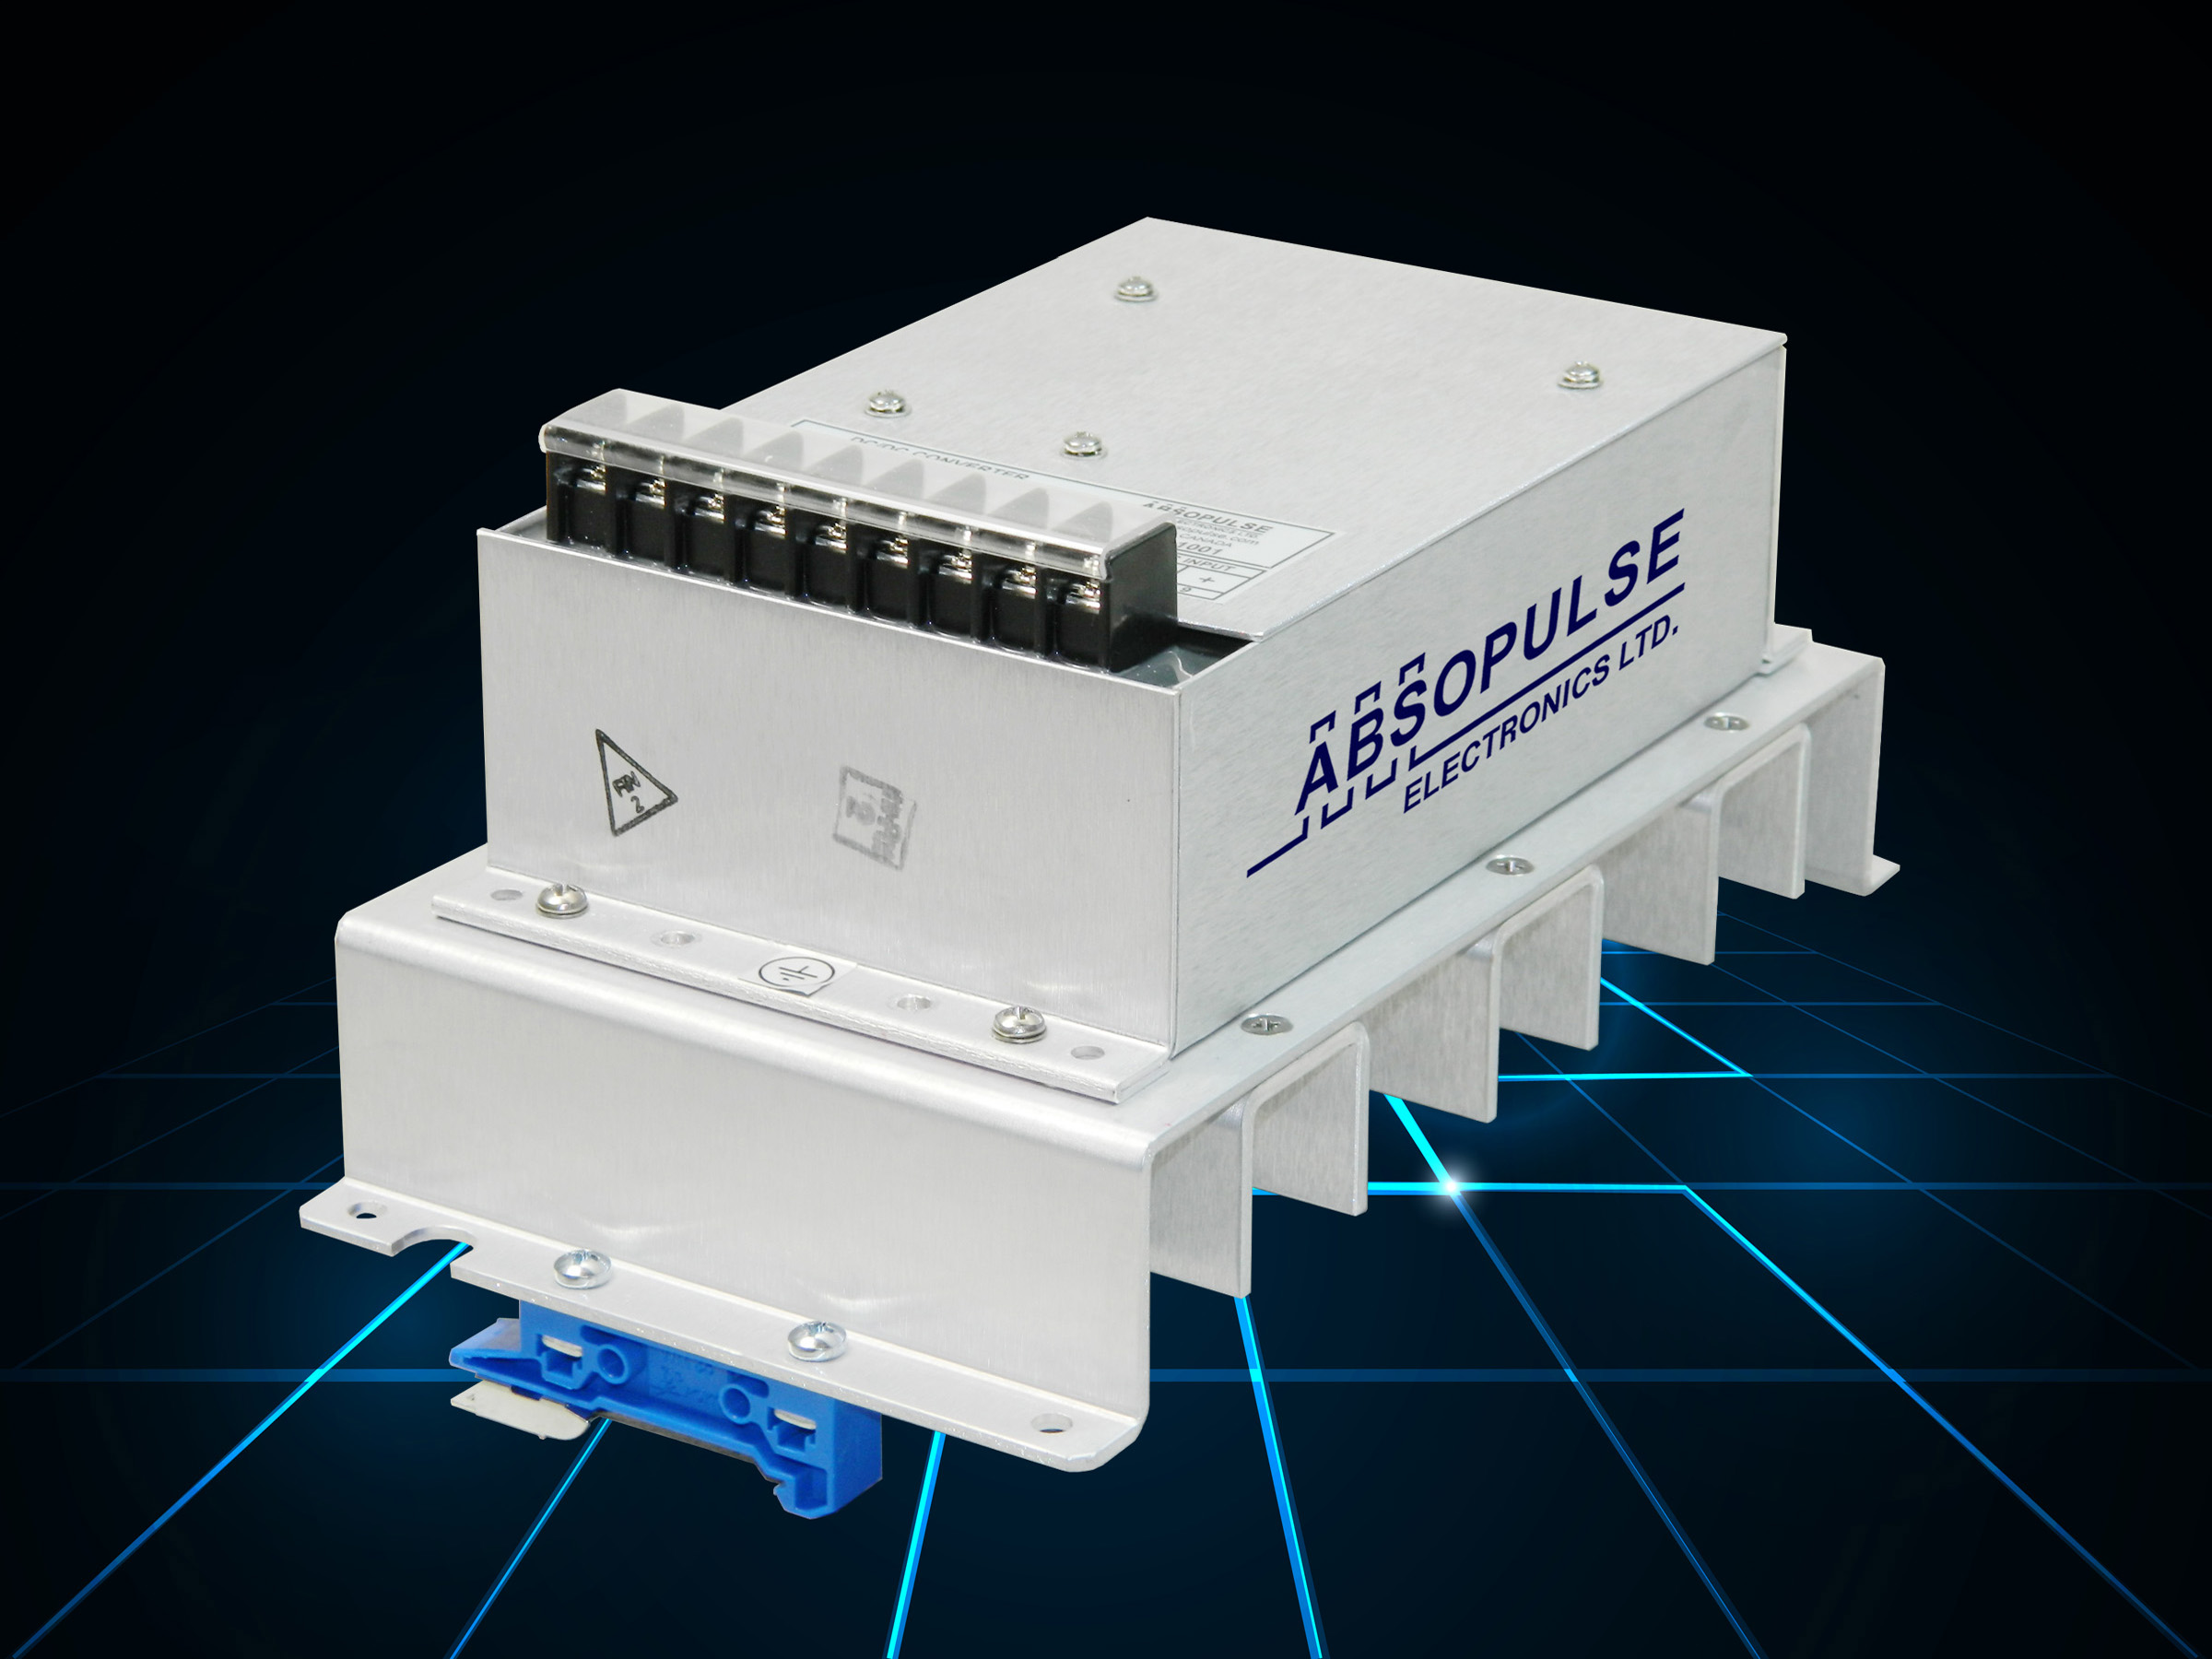 250W Convection Cooled, DC-DC Converters for Harsh Environments